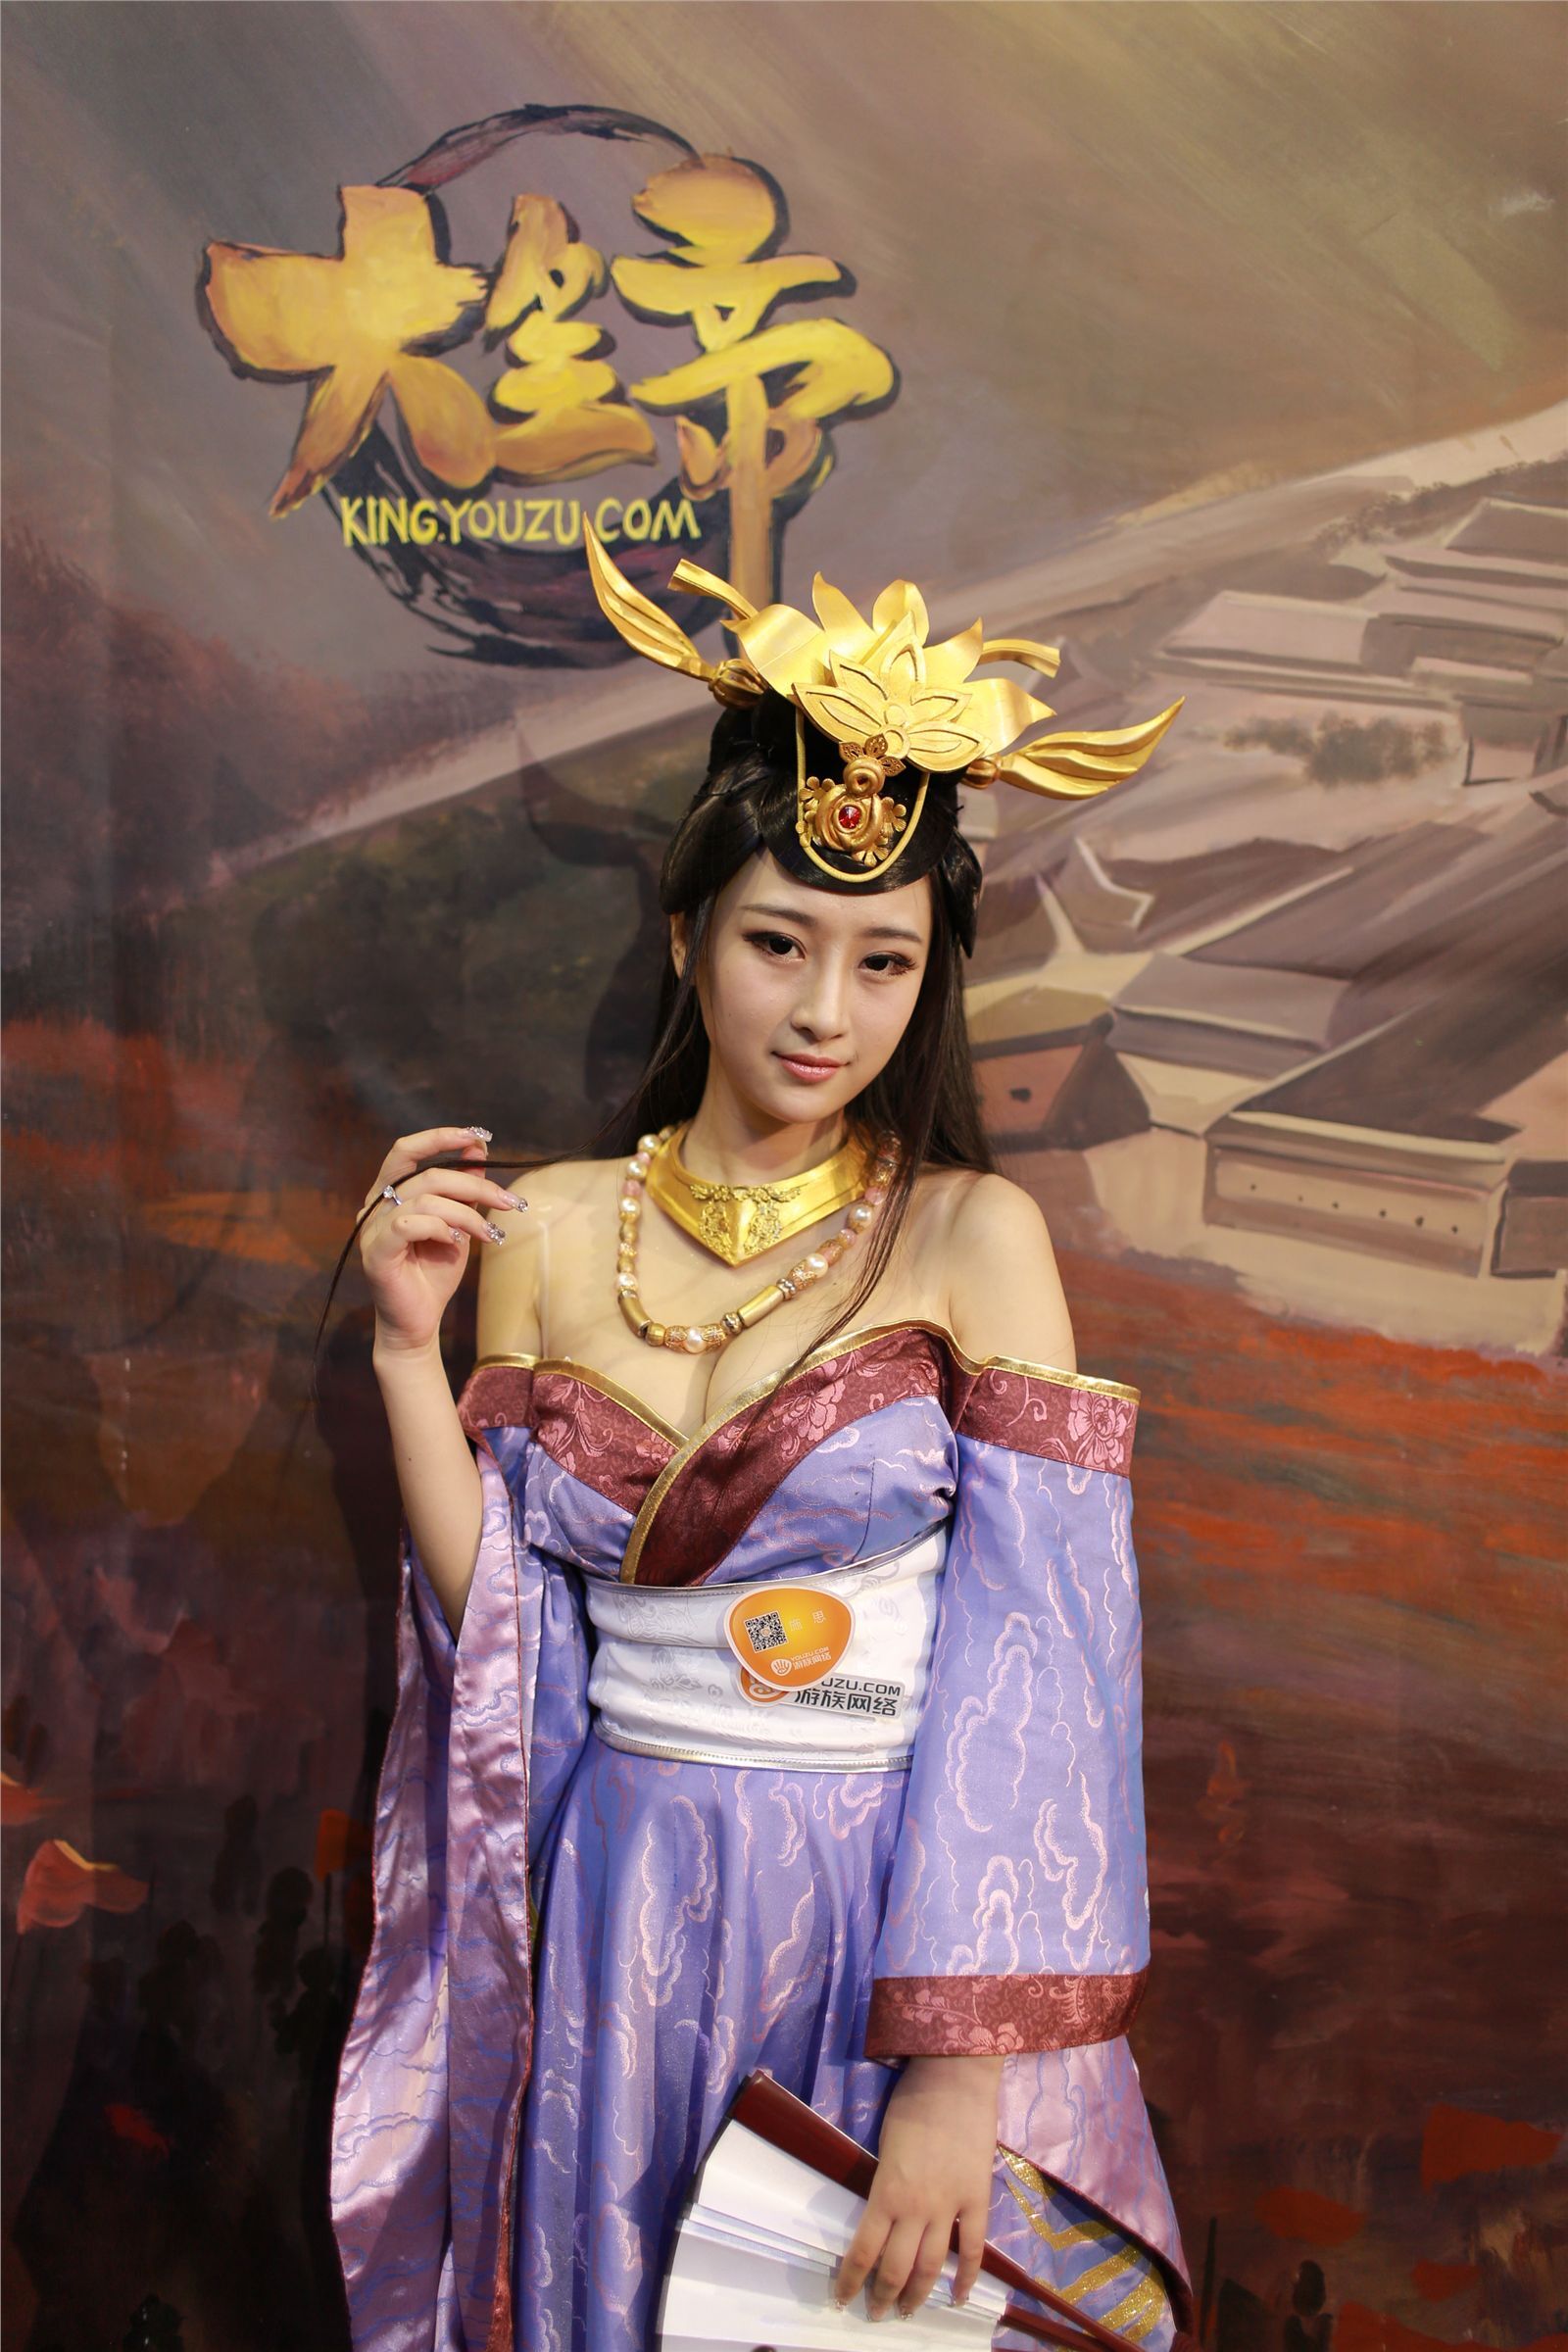 ChinaJoy 2014 Youzu online exhibition stand goddess Chaoqing Collection 2